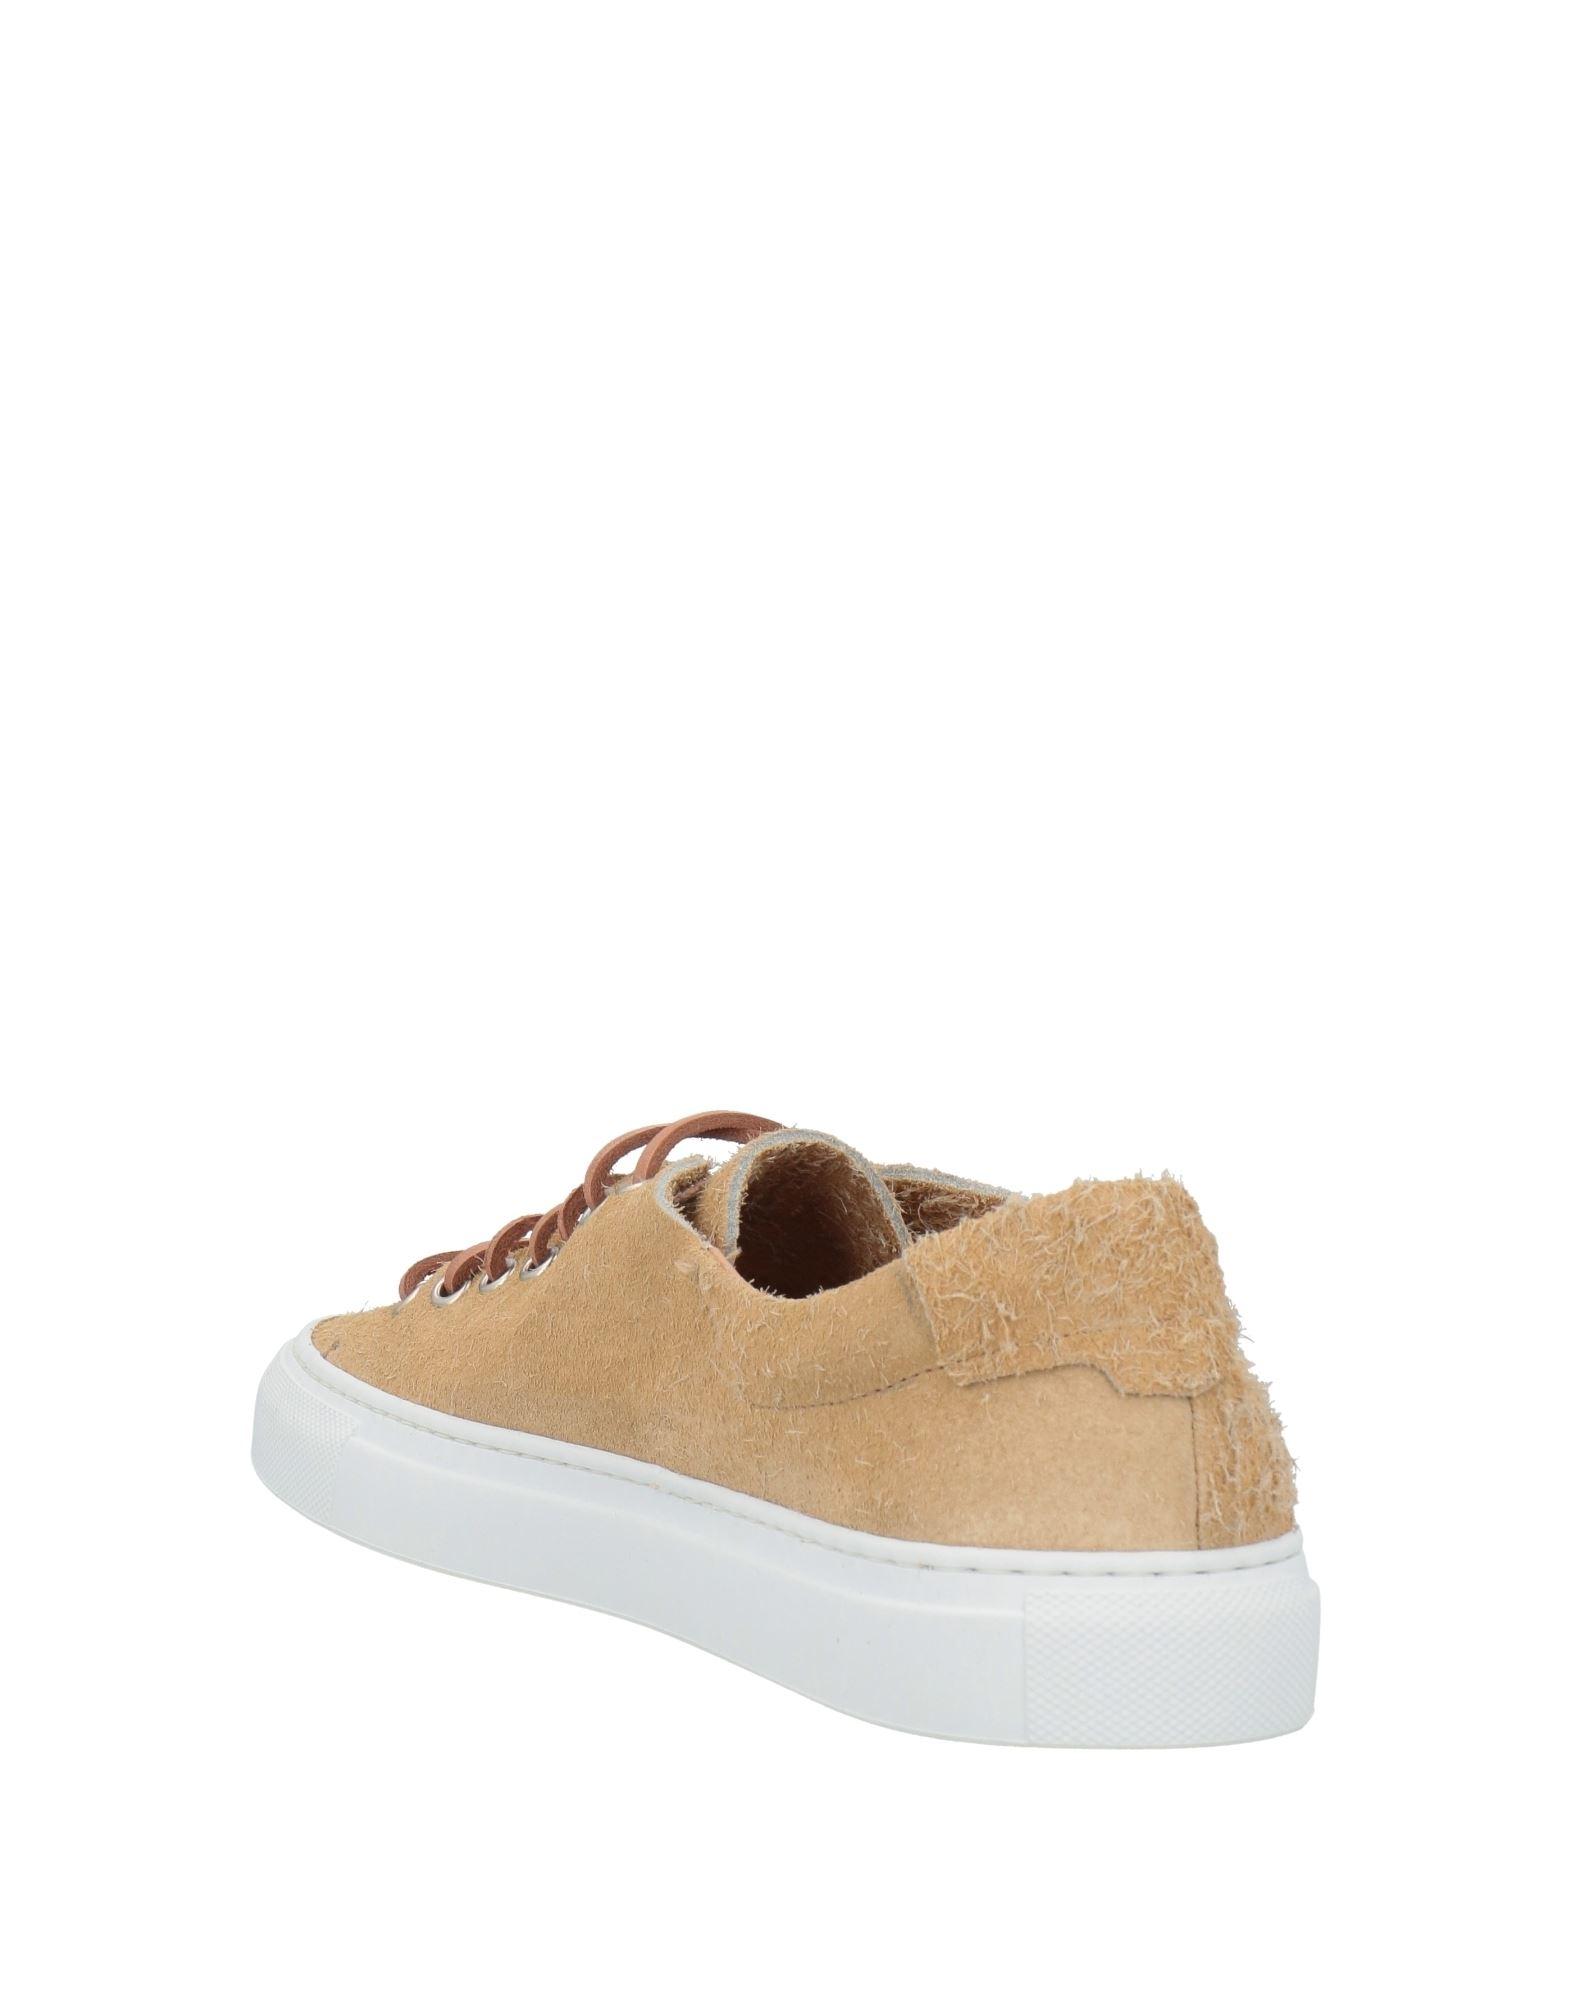 Boemos Trainers in Natural for Men | Lyst